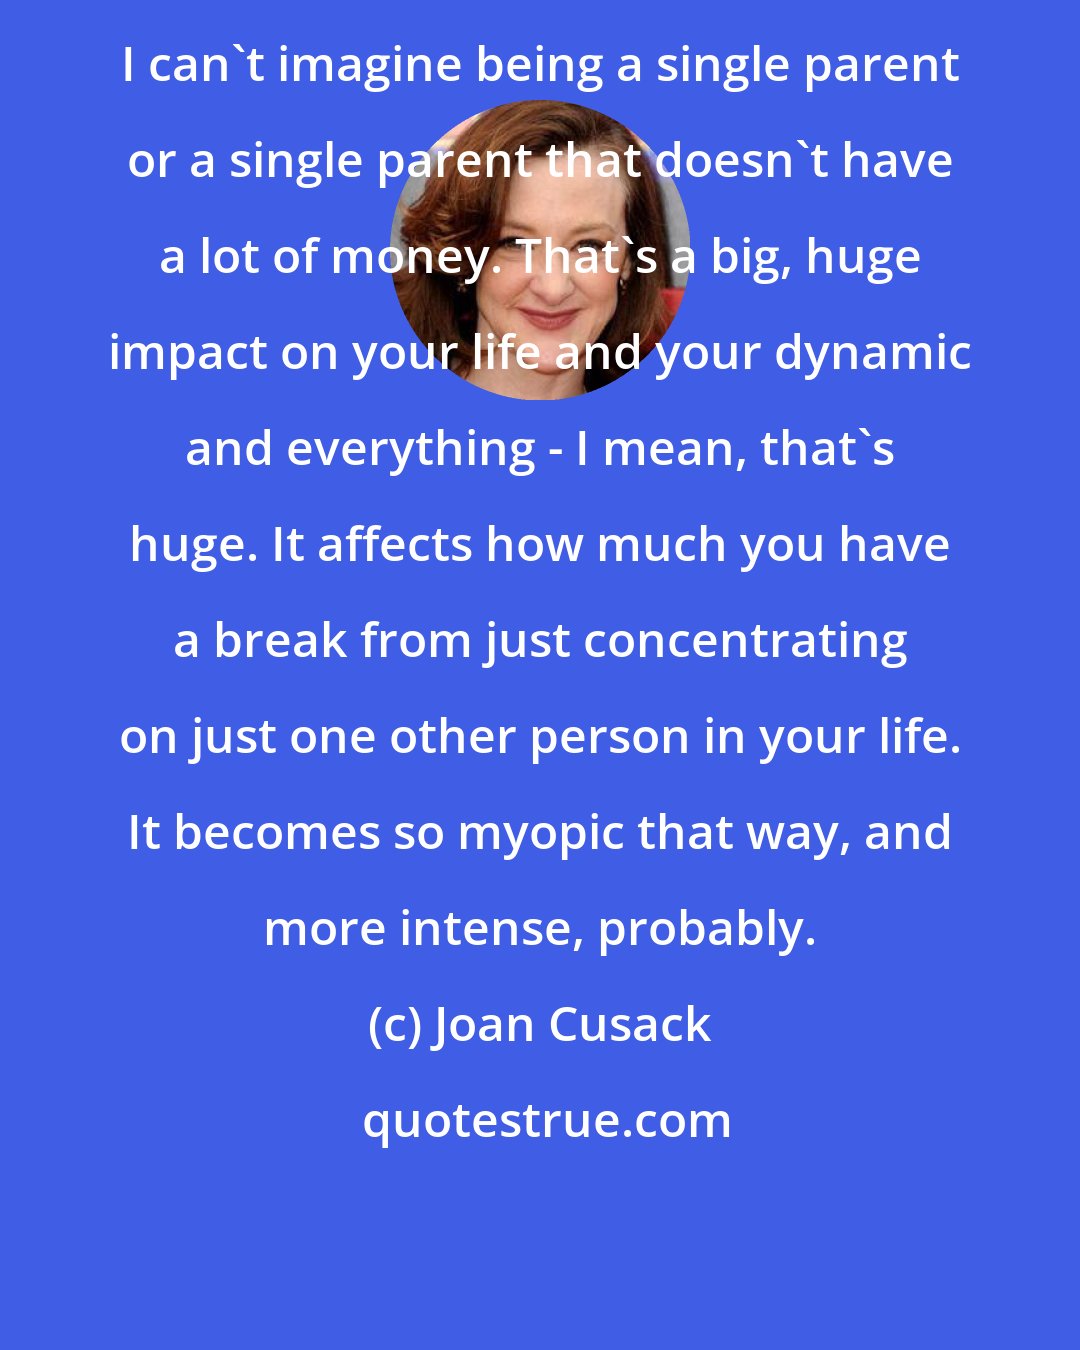 Joan Cusack: I can't imagine being a single parent or a single parent that doesn't have a lot of money. That's a big, huge impact on your life and your dynamic and everything - I mean, that's huge. It affects how much you have a break from just concentrating on just one other person in your life. It becomes so myopic that way, and more intense, probably.